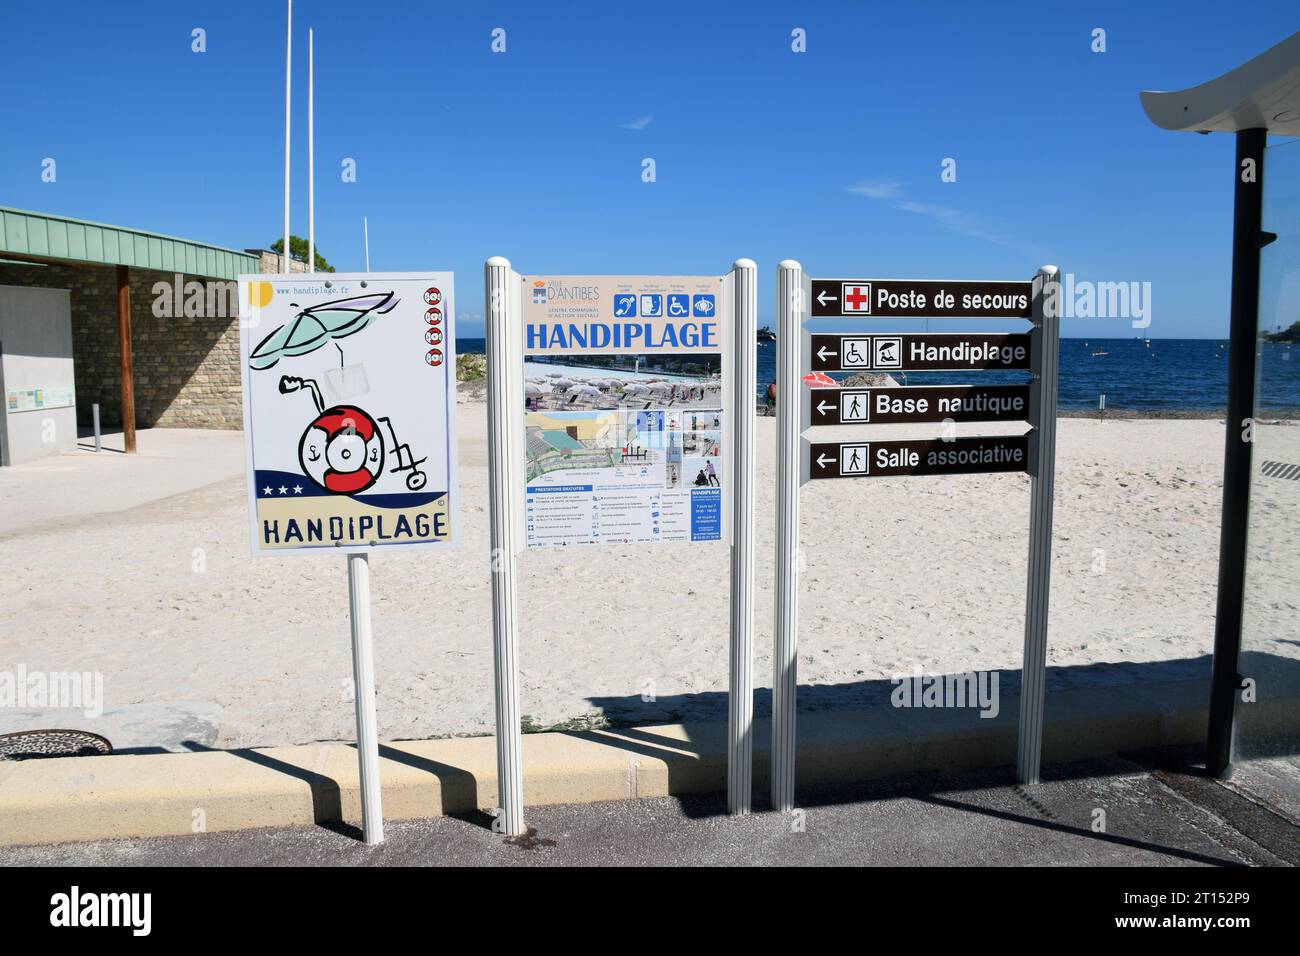 Handiplage, beach for disabled use, adapted with equipment and facilities, Antibes, Cote d'Azur, France Sep 2023 Stock Photo